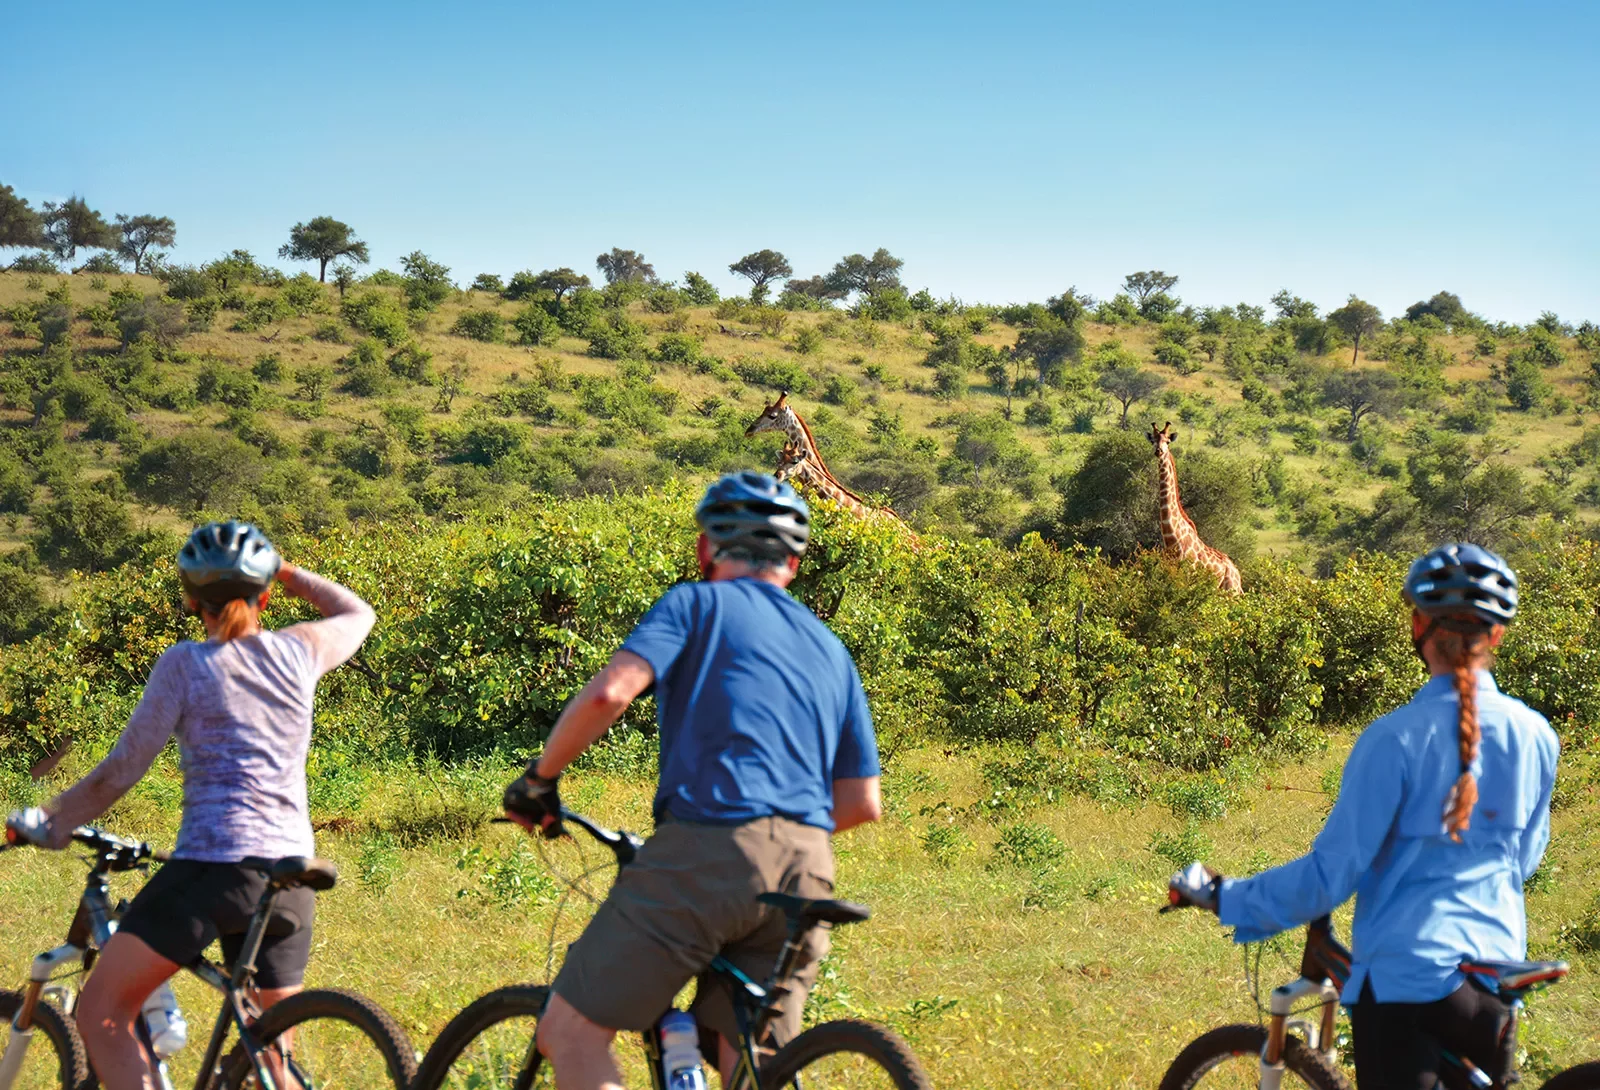 Cyclists stopped by side of road to watch giraffes in the distance